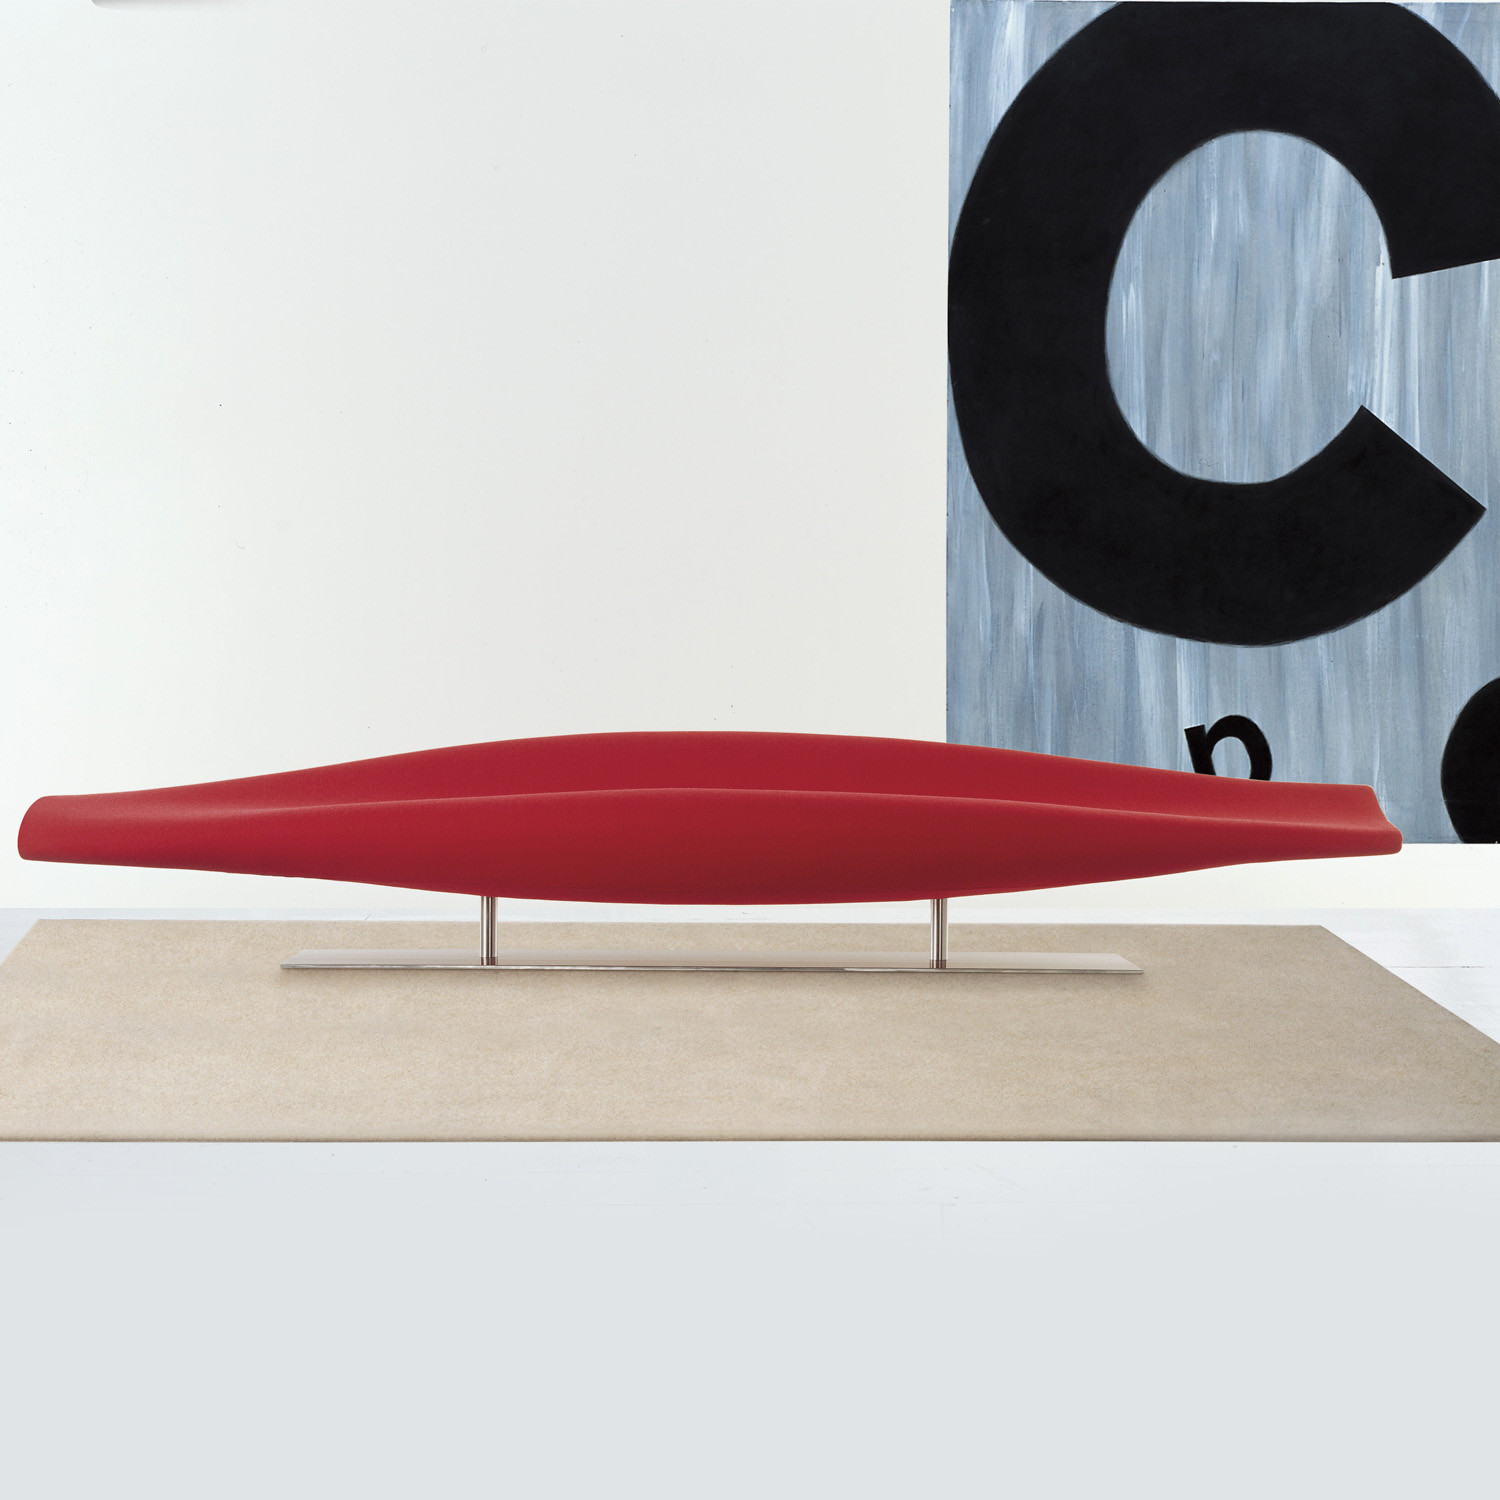 Inout Sofa and Bench by Cappellini